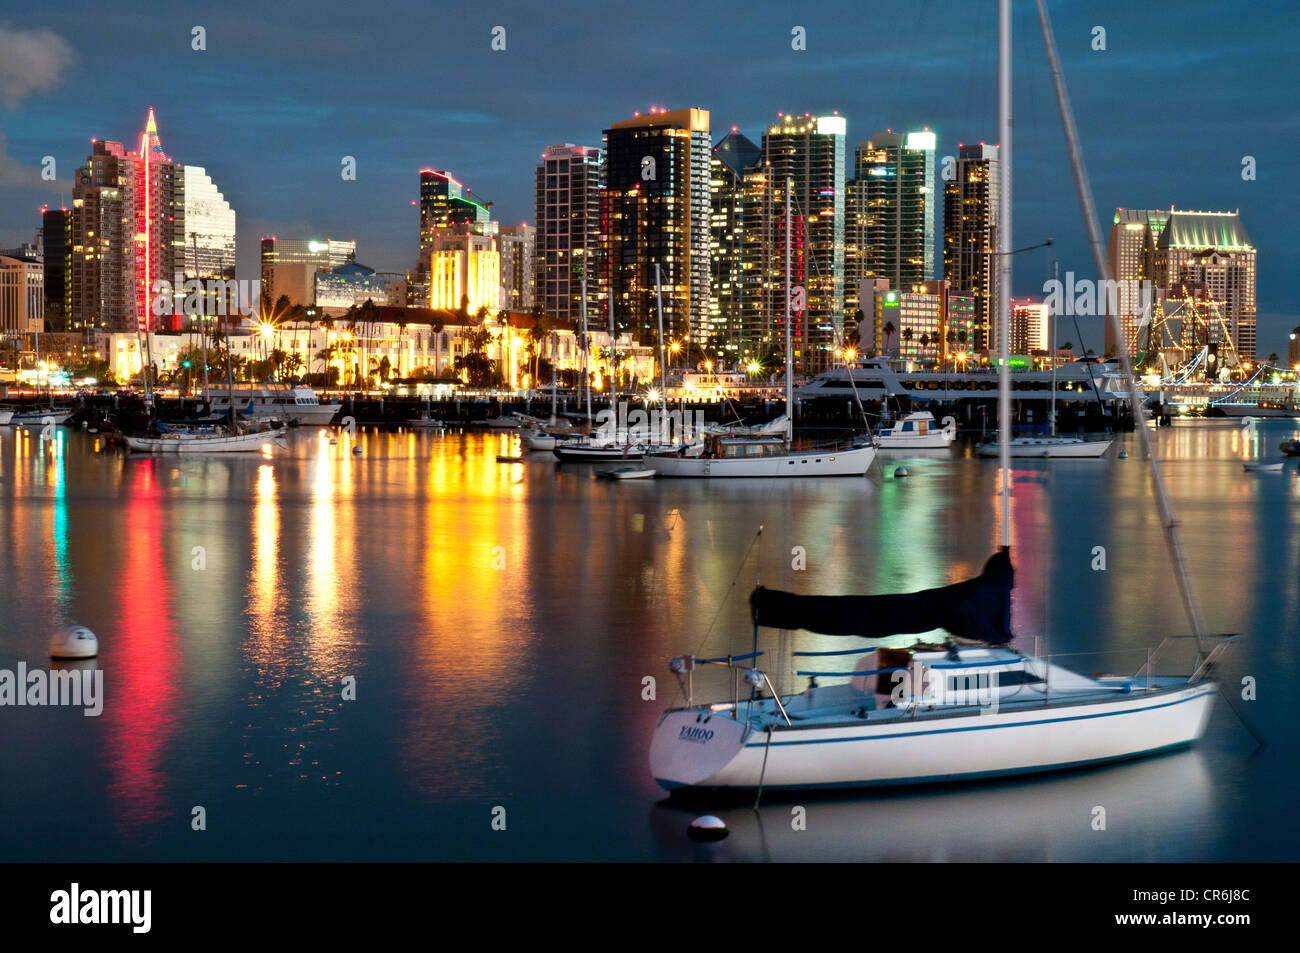 San Diego city lights reflected on water with sailboats in foreground Stock Photo